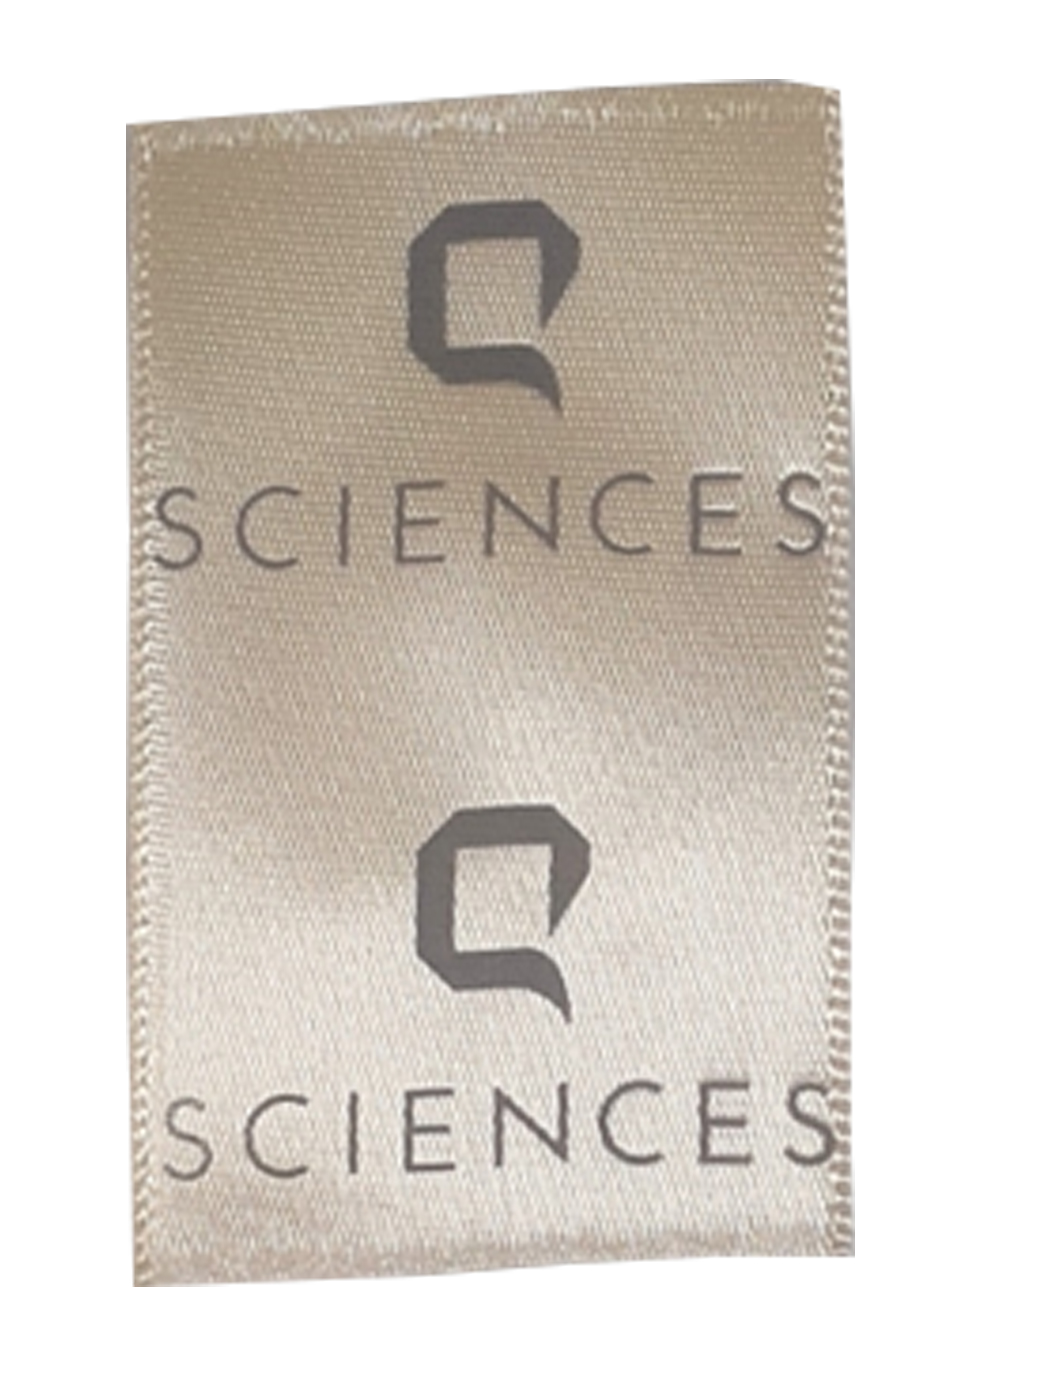 Promo Products. USA Print on Woven. Rush Q Sciences print on beanie label. Patches and Labels. USA Print on Woven. Custom sew on woven label.